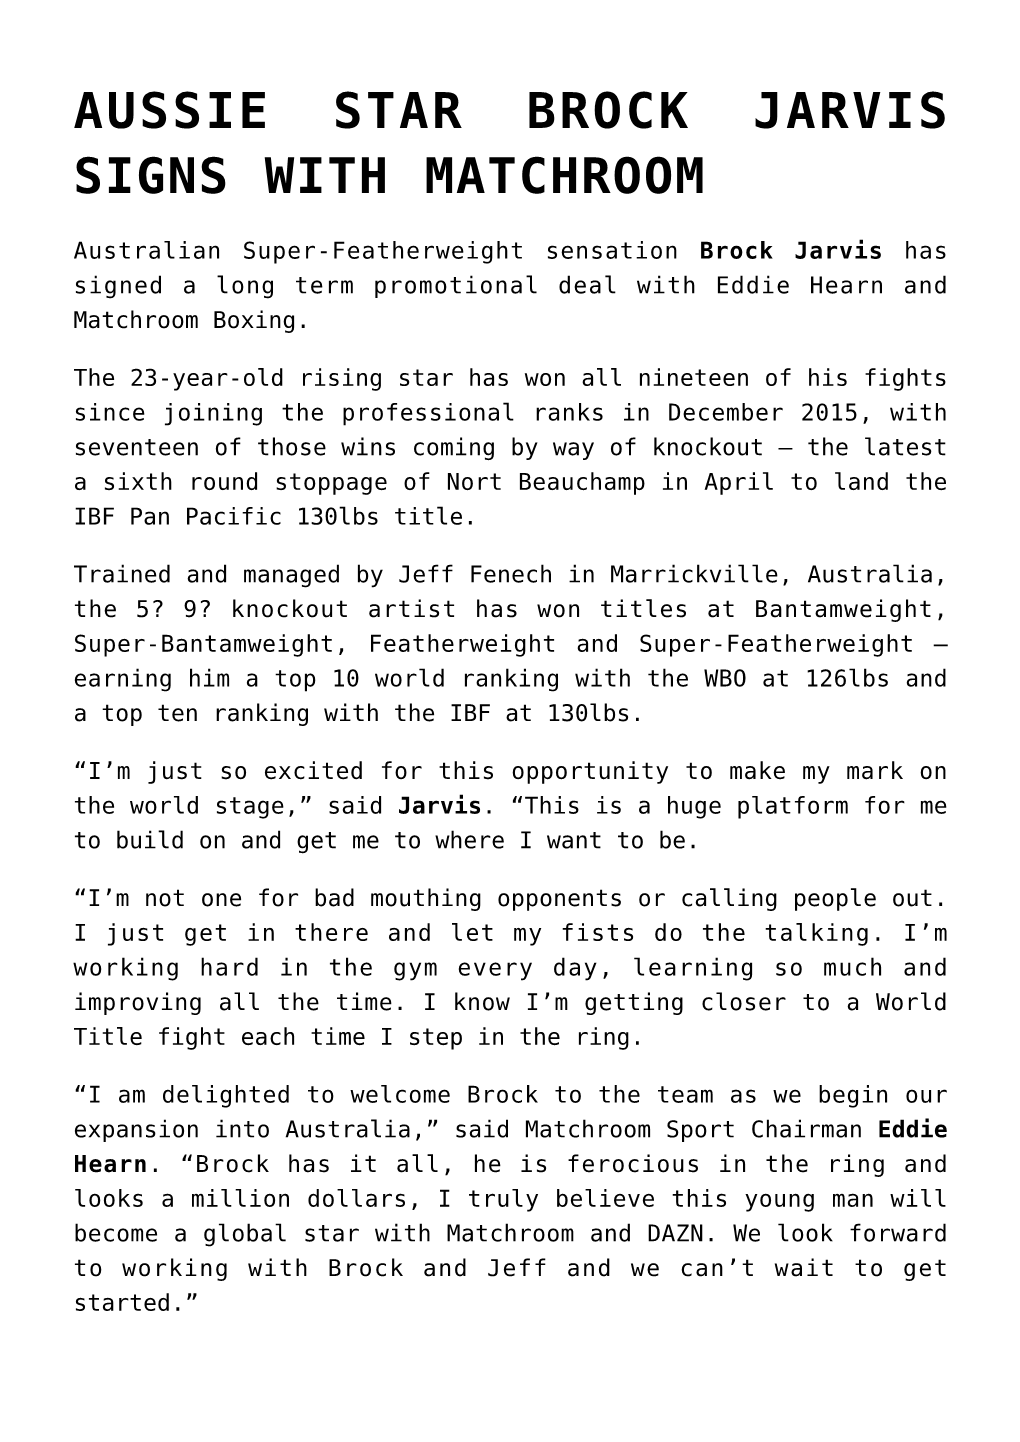 Aussie Star Brock Jarvis Signs with Matchroom